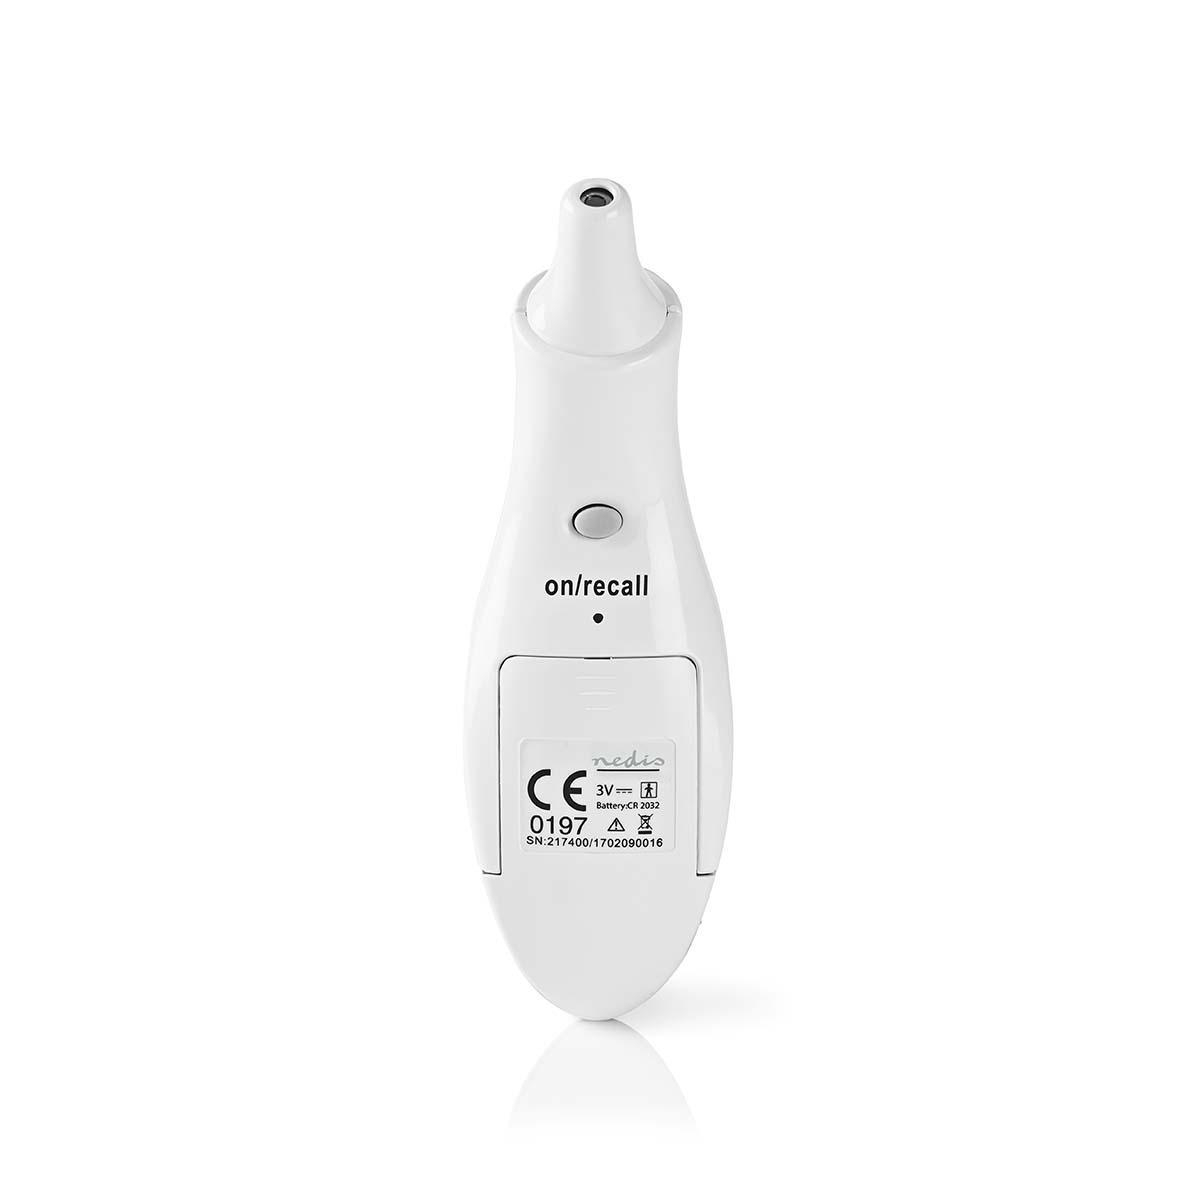 1 second ear thermometer